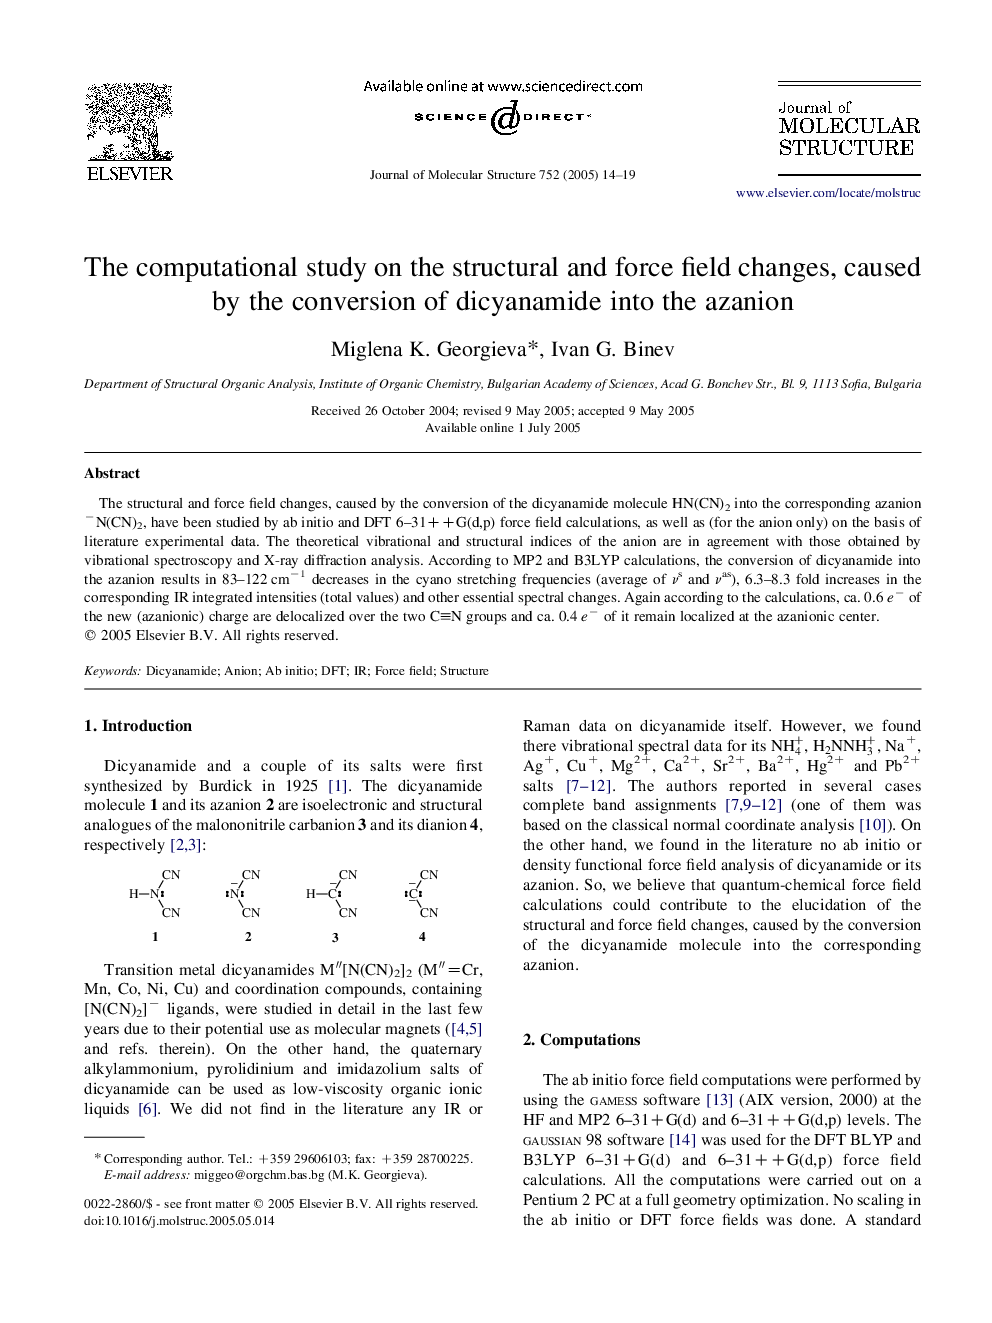 The computational study on the structural and force field changes, caused by the conversion of dicyanamide into the azanion